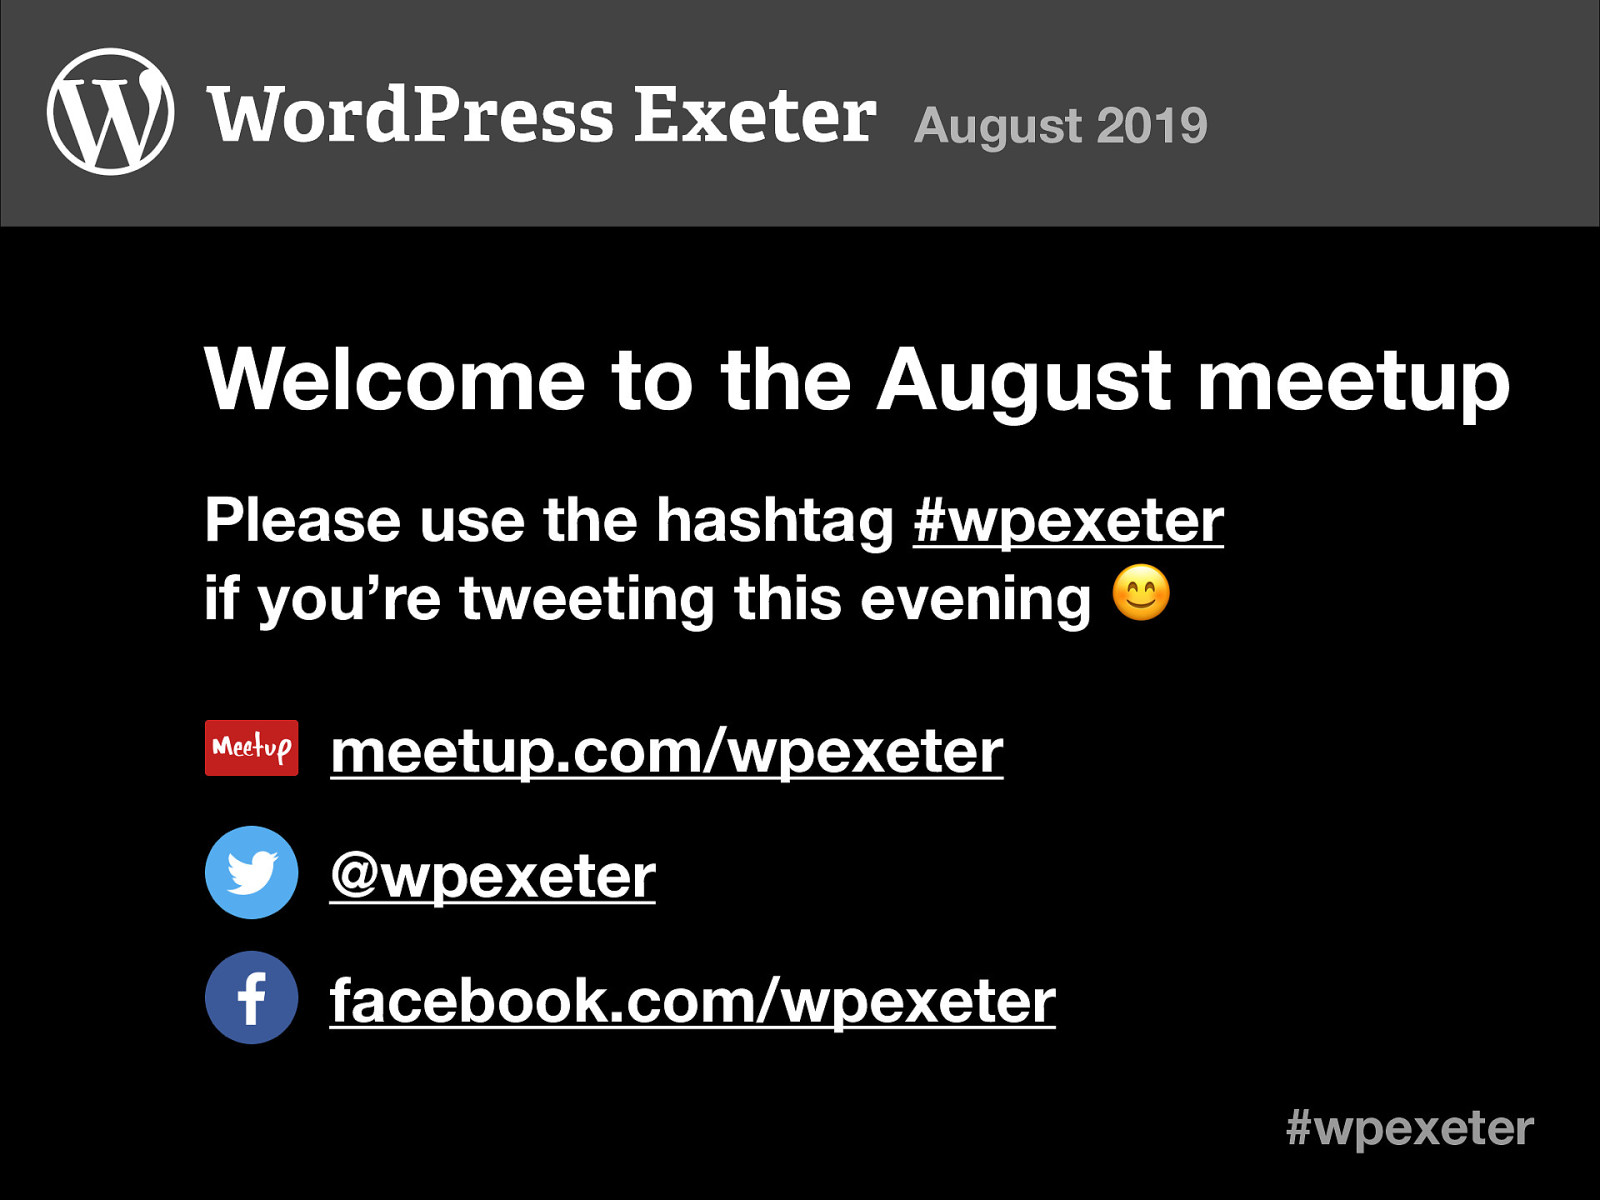 WordPress Exeter August 2019 Introductory slides